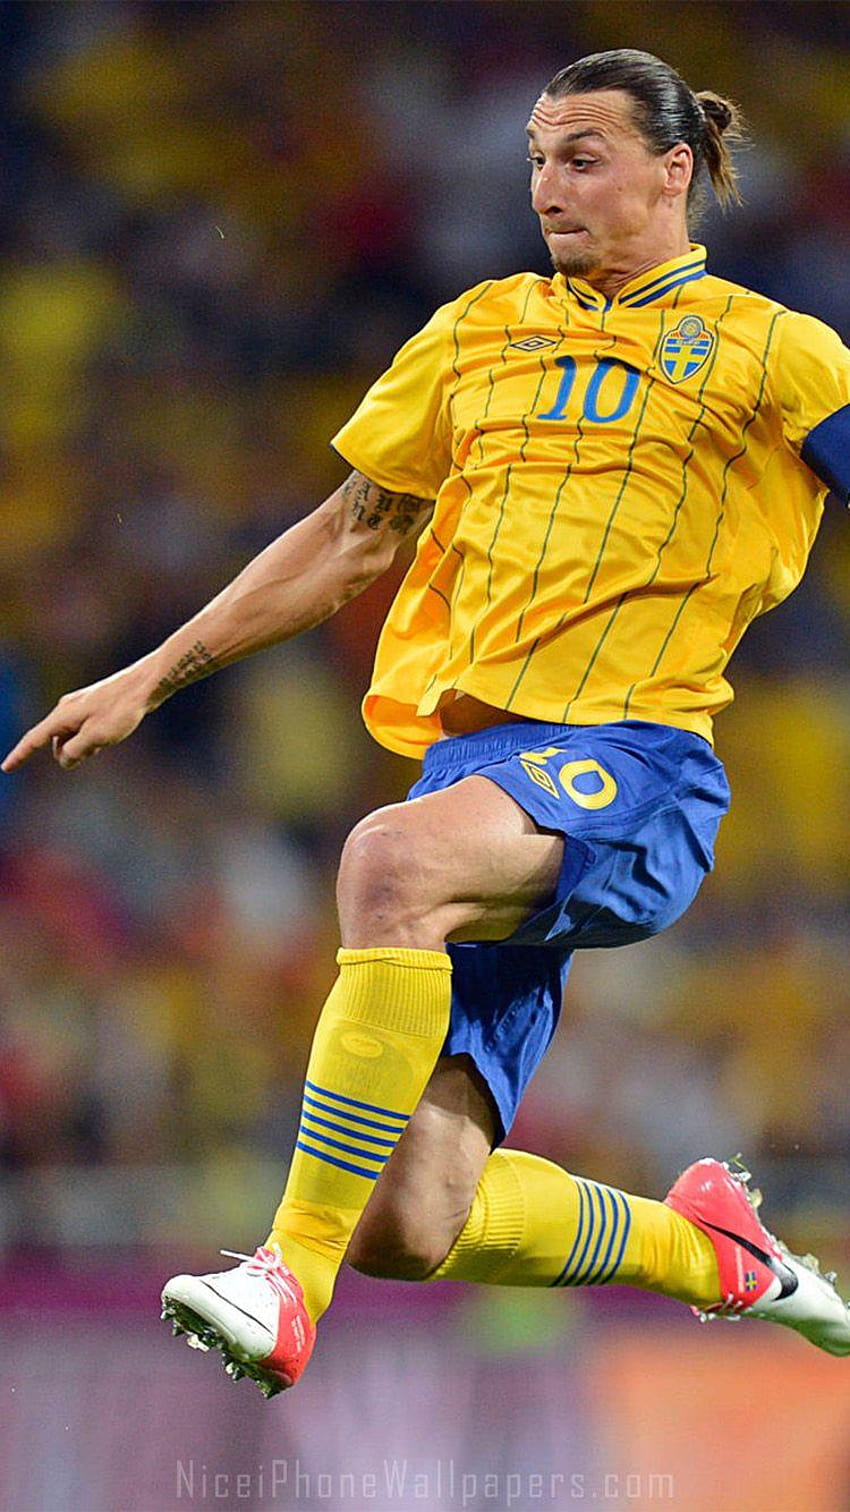 Zlatan Ibrahimovic iPhone 6/6 plus and backgrounds, sweden national football team HD phone wallpaper